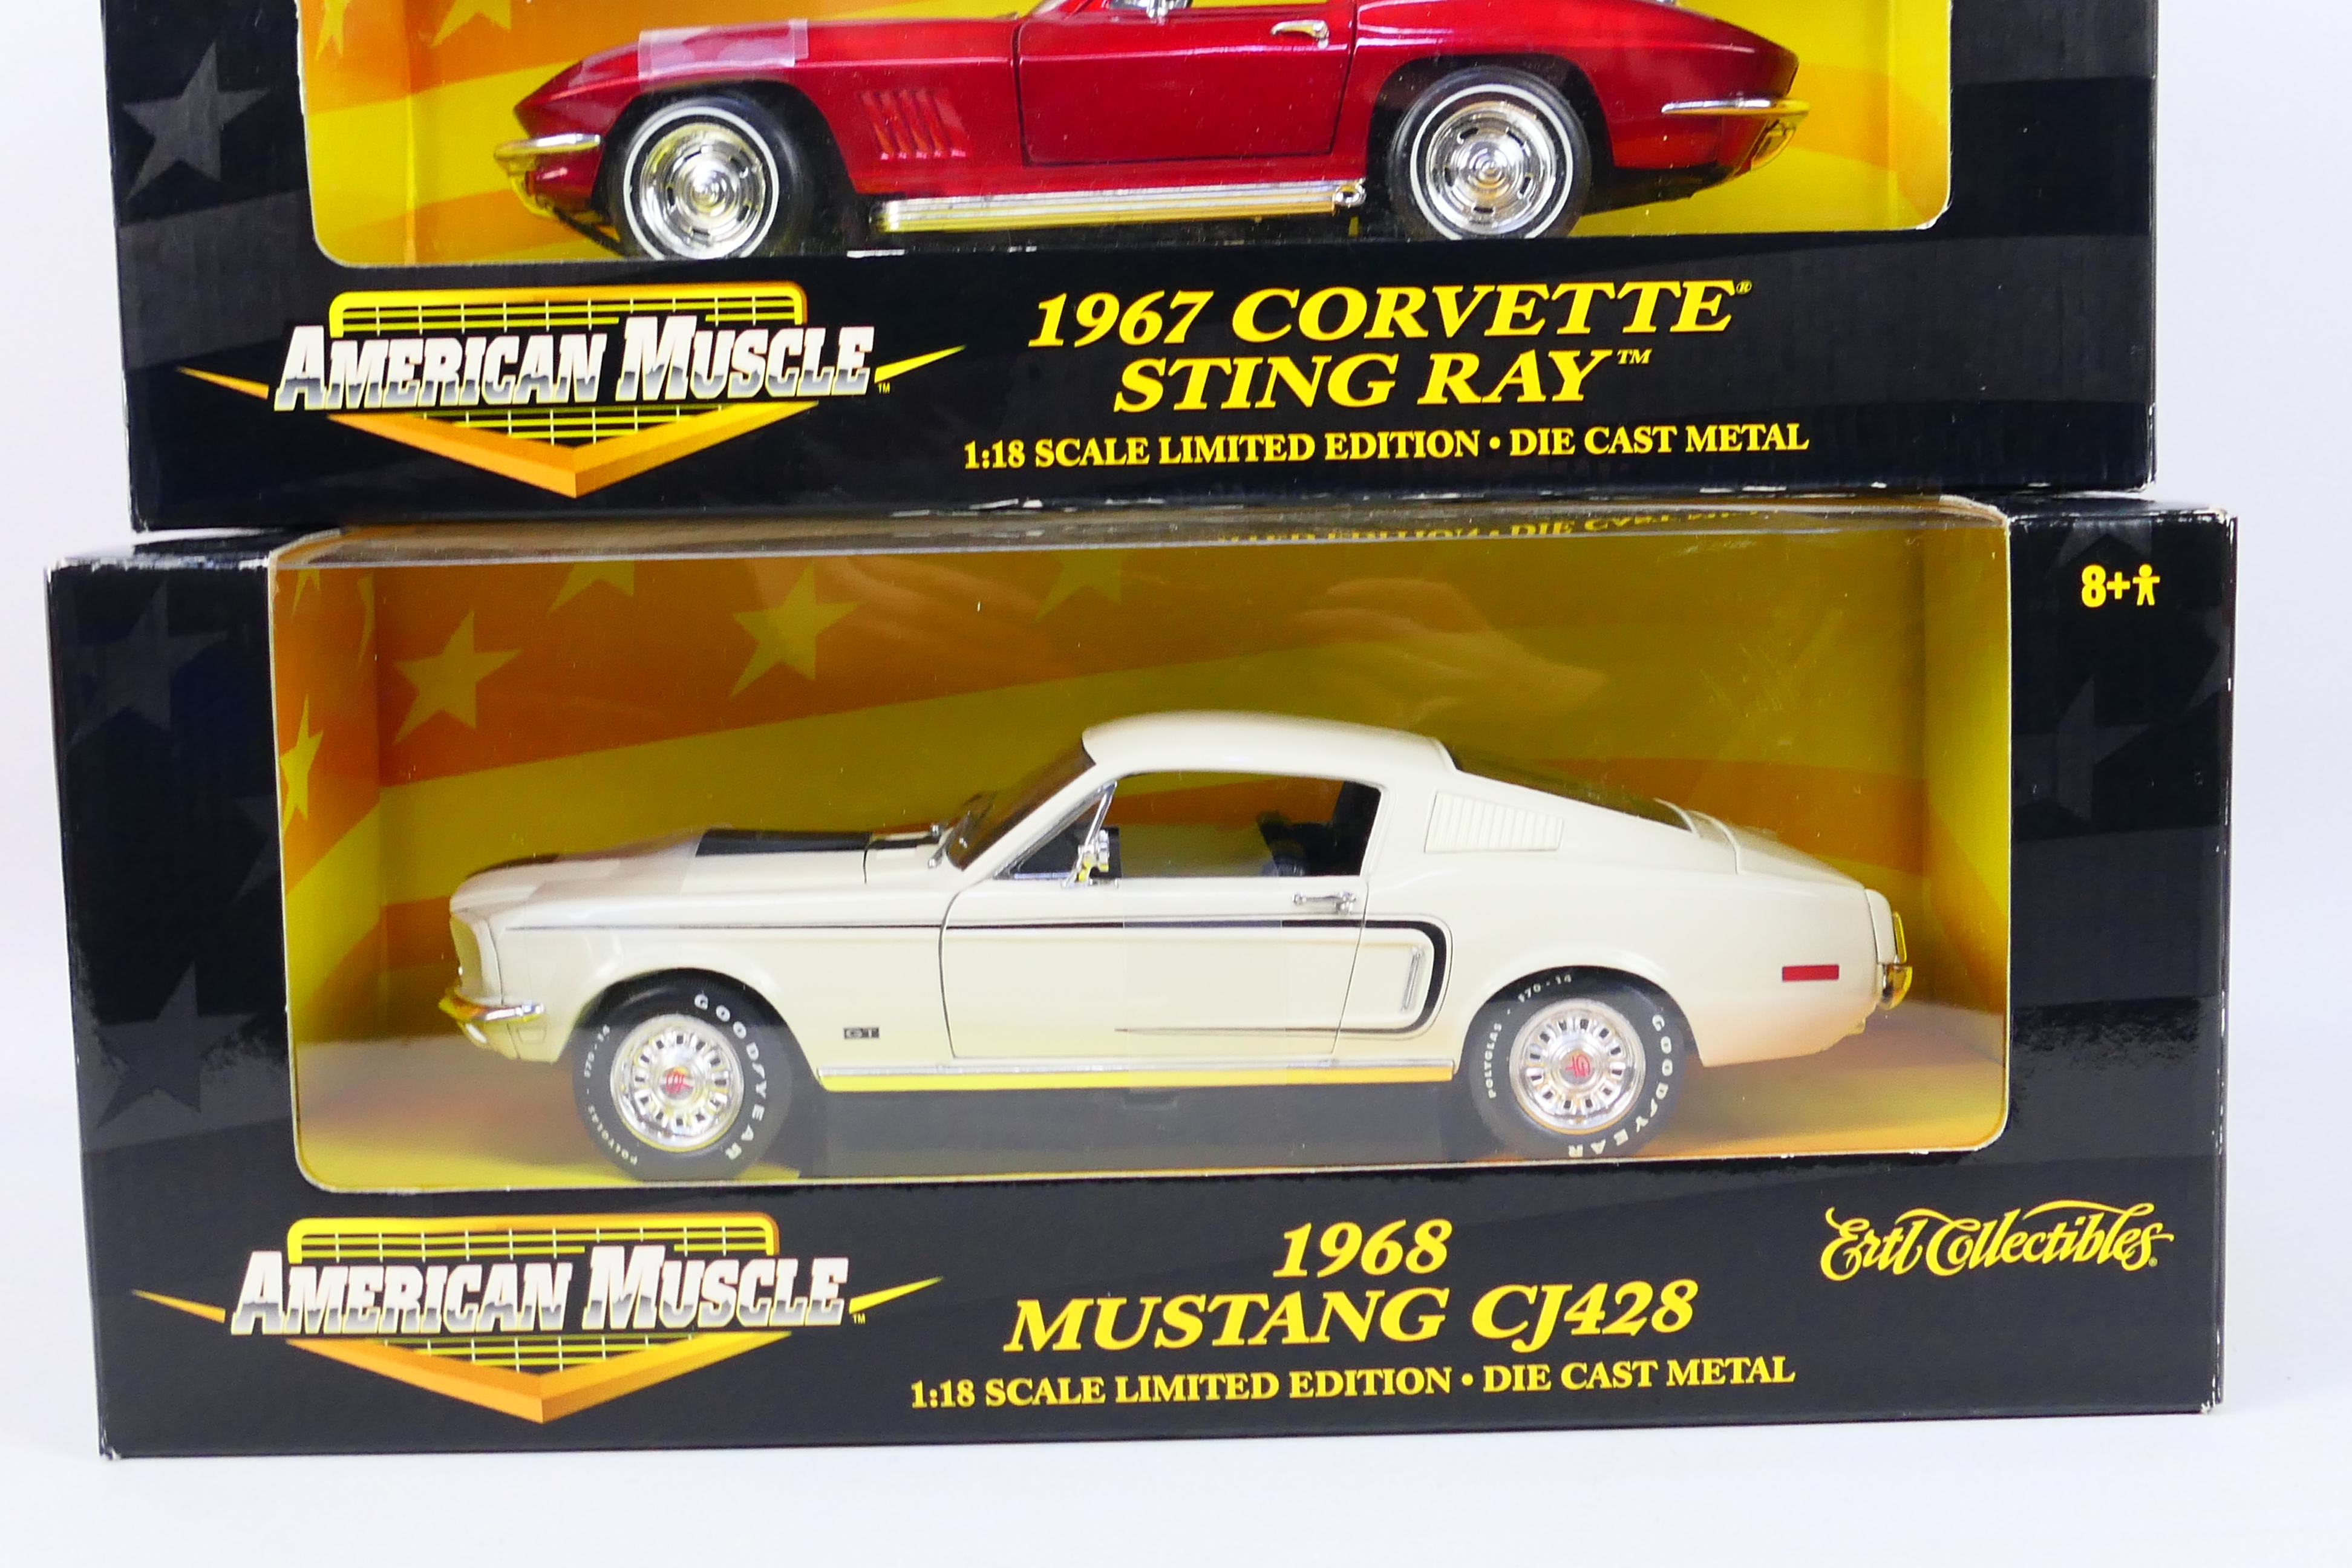 Ertl - Two boxed diecast 'Limited Edition' 1:18 scale model cars from Ertl's 'American Muscle' - Image 2 of 3